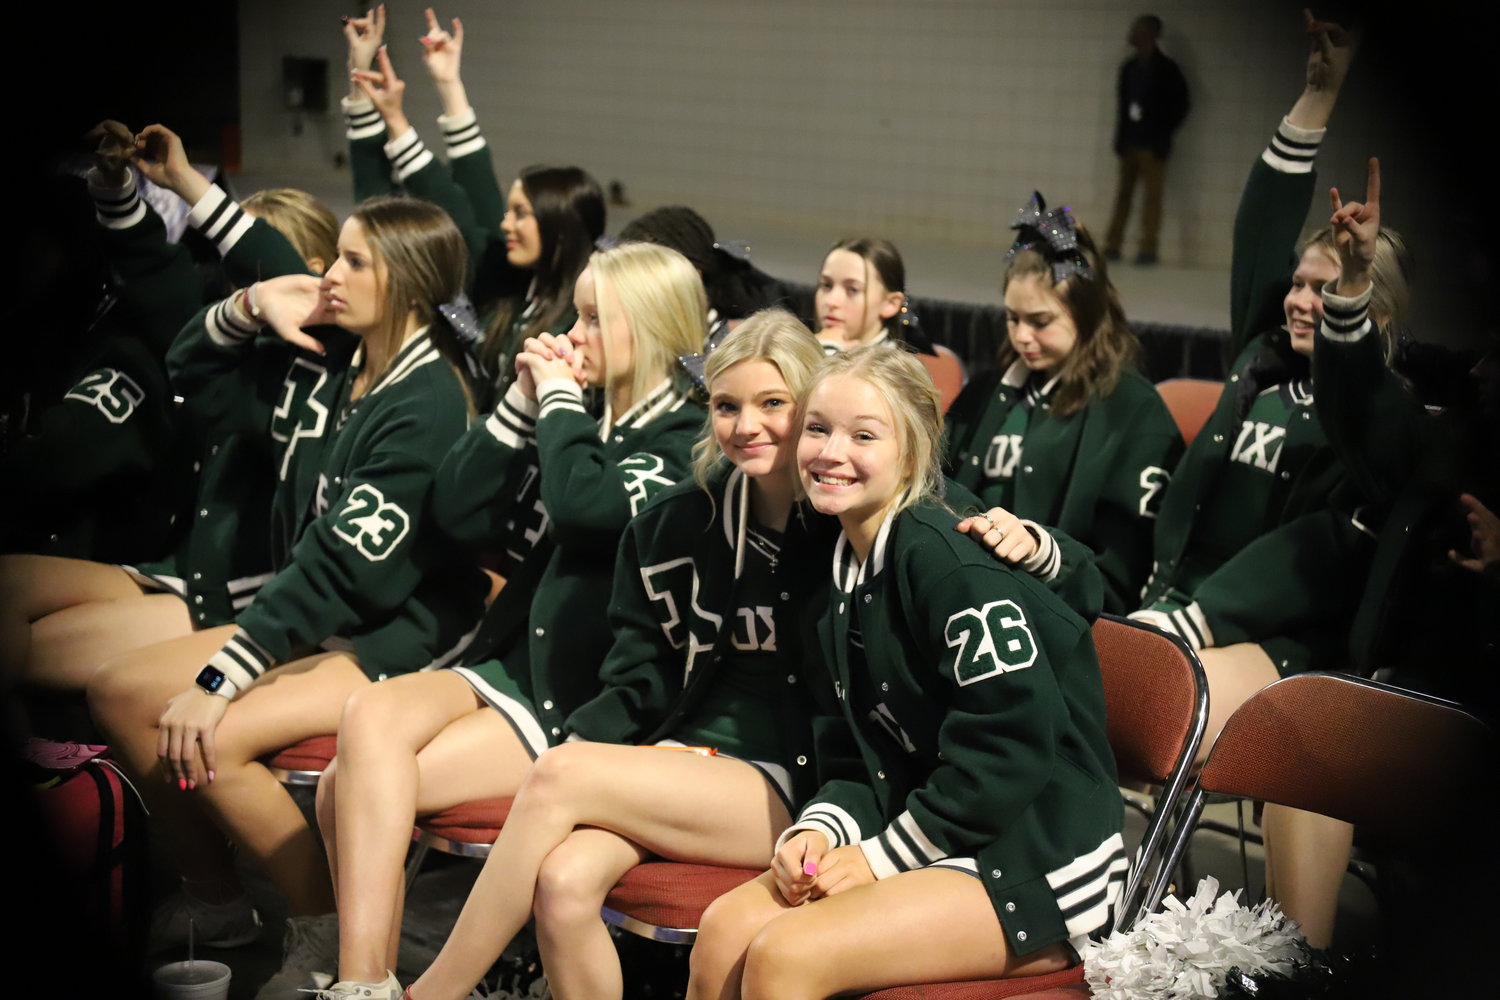 The Dutch Fork cheerleaders in attendance at the Florence Civic Center.